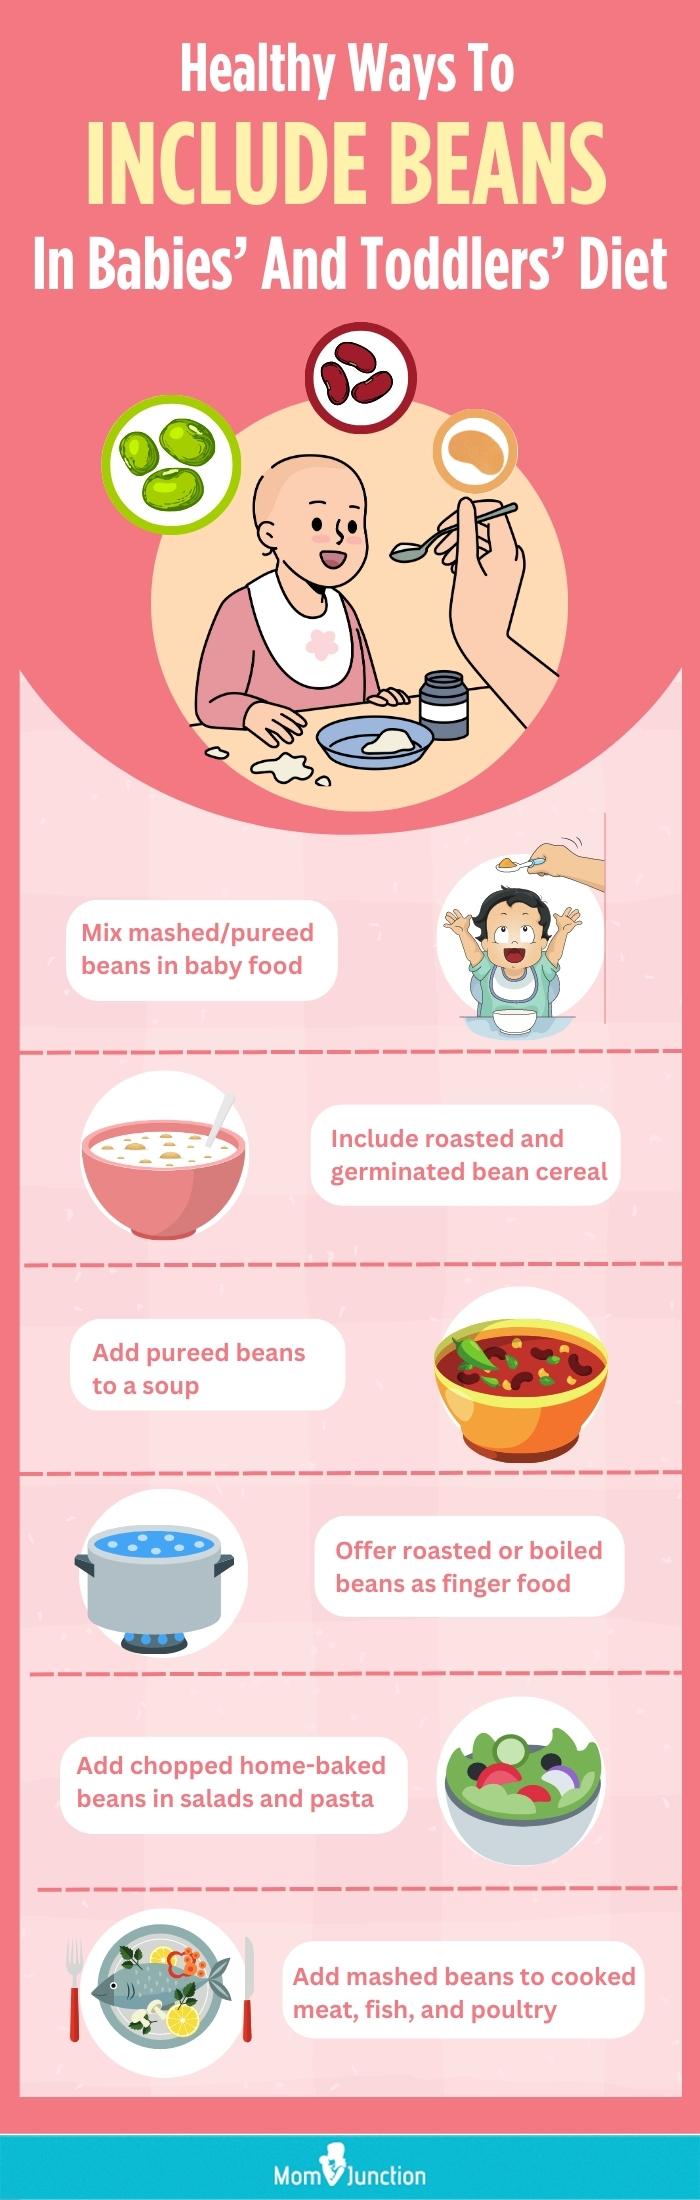 healthy ways to include beans in babies and toddlers diet (infographic)